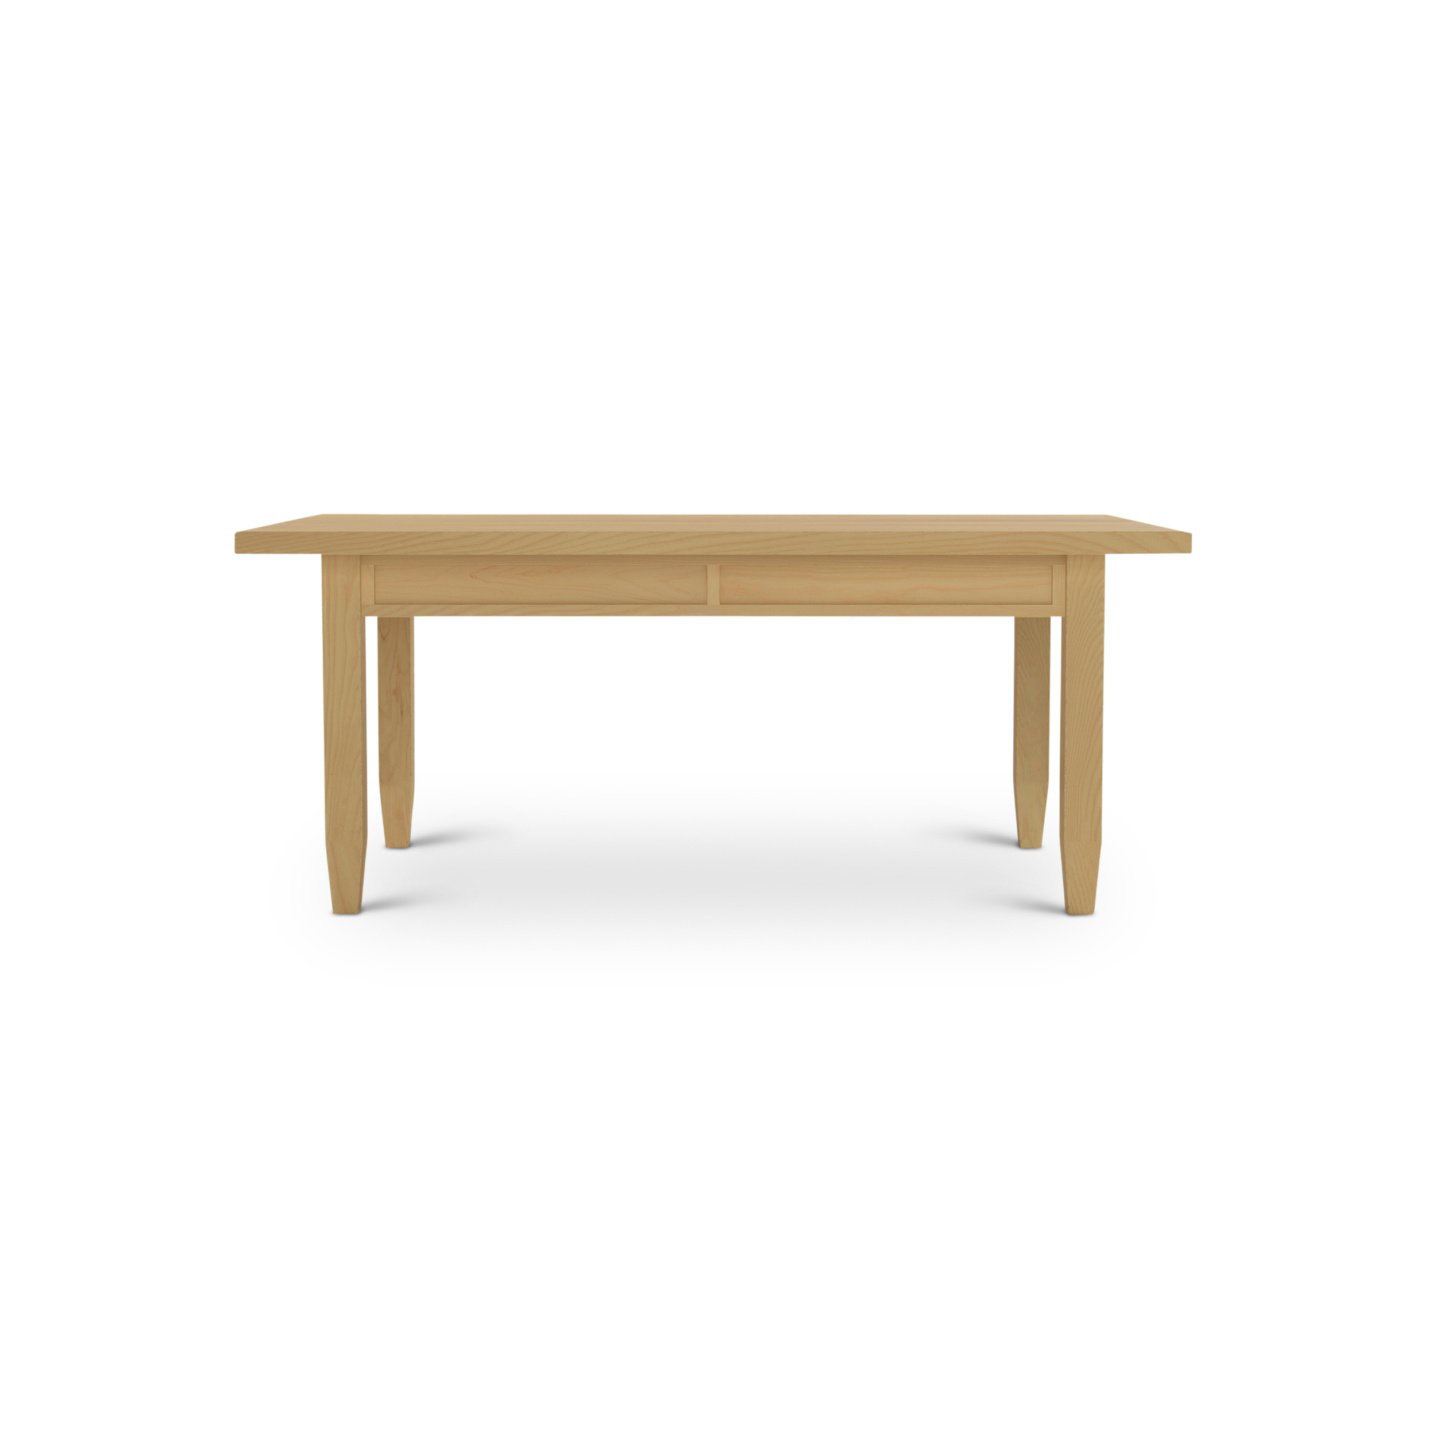 Ash kitchen table with square legs